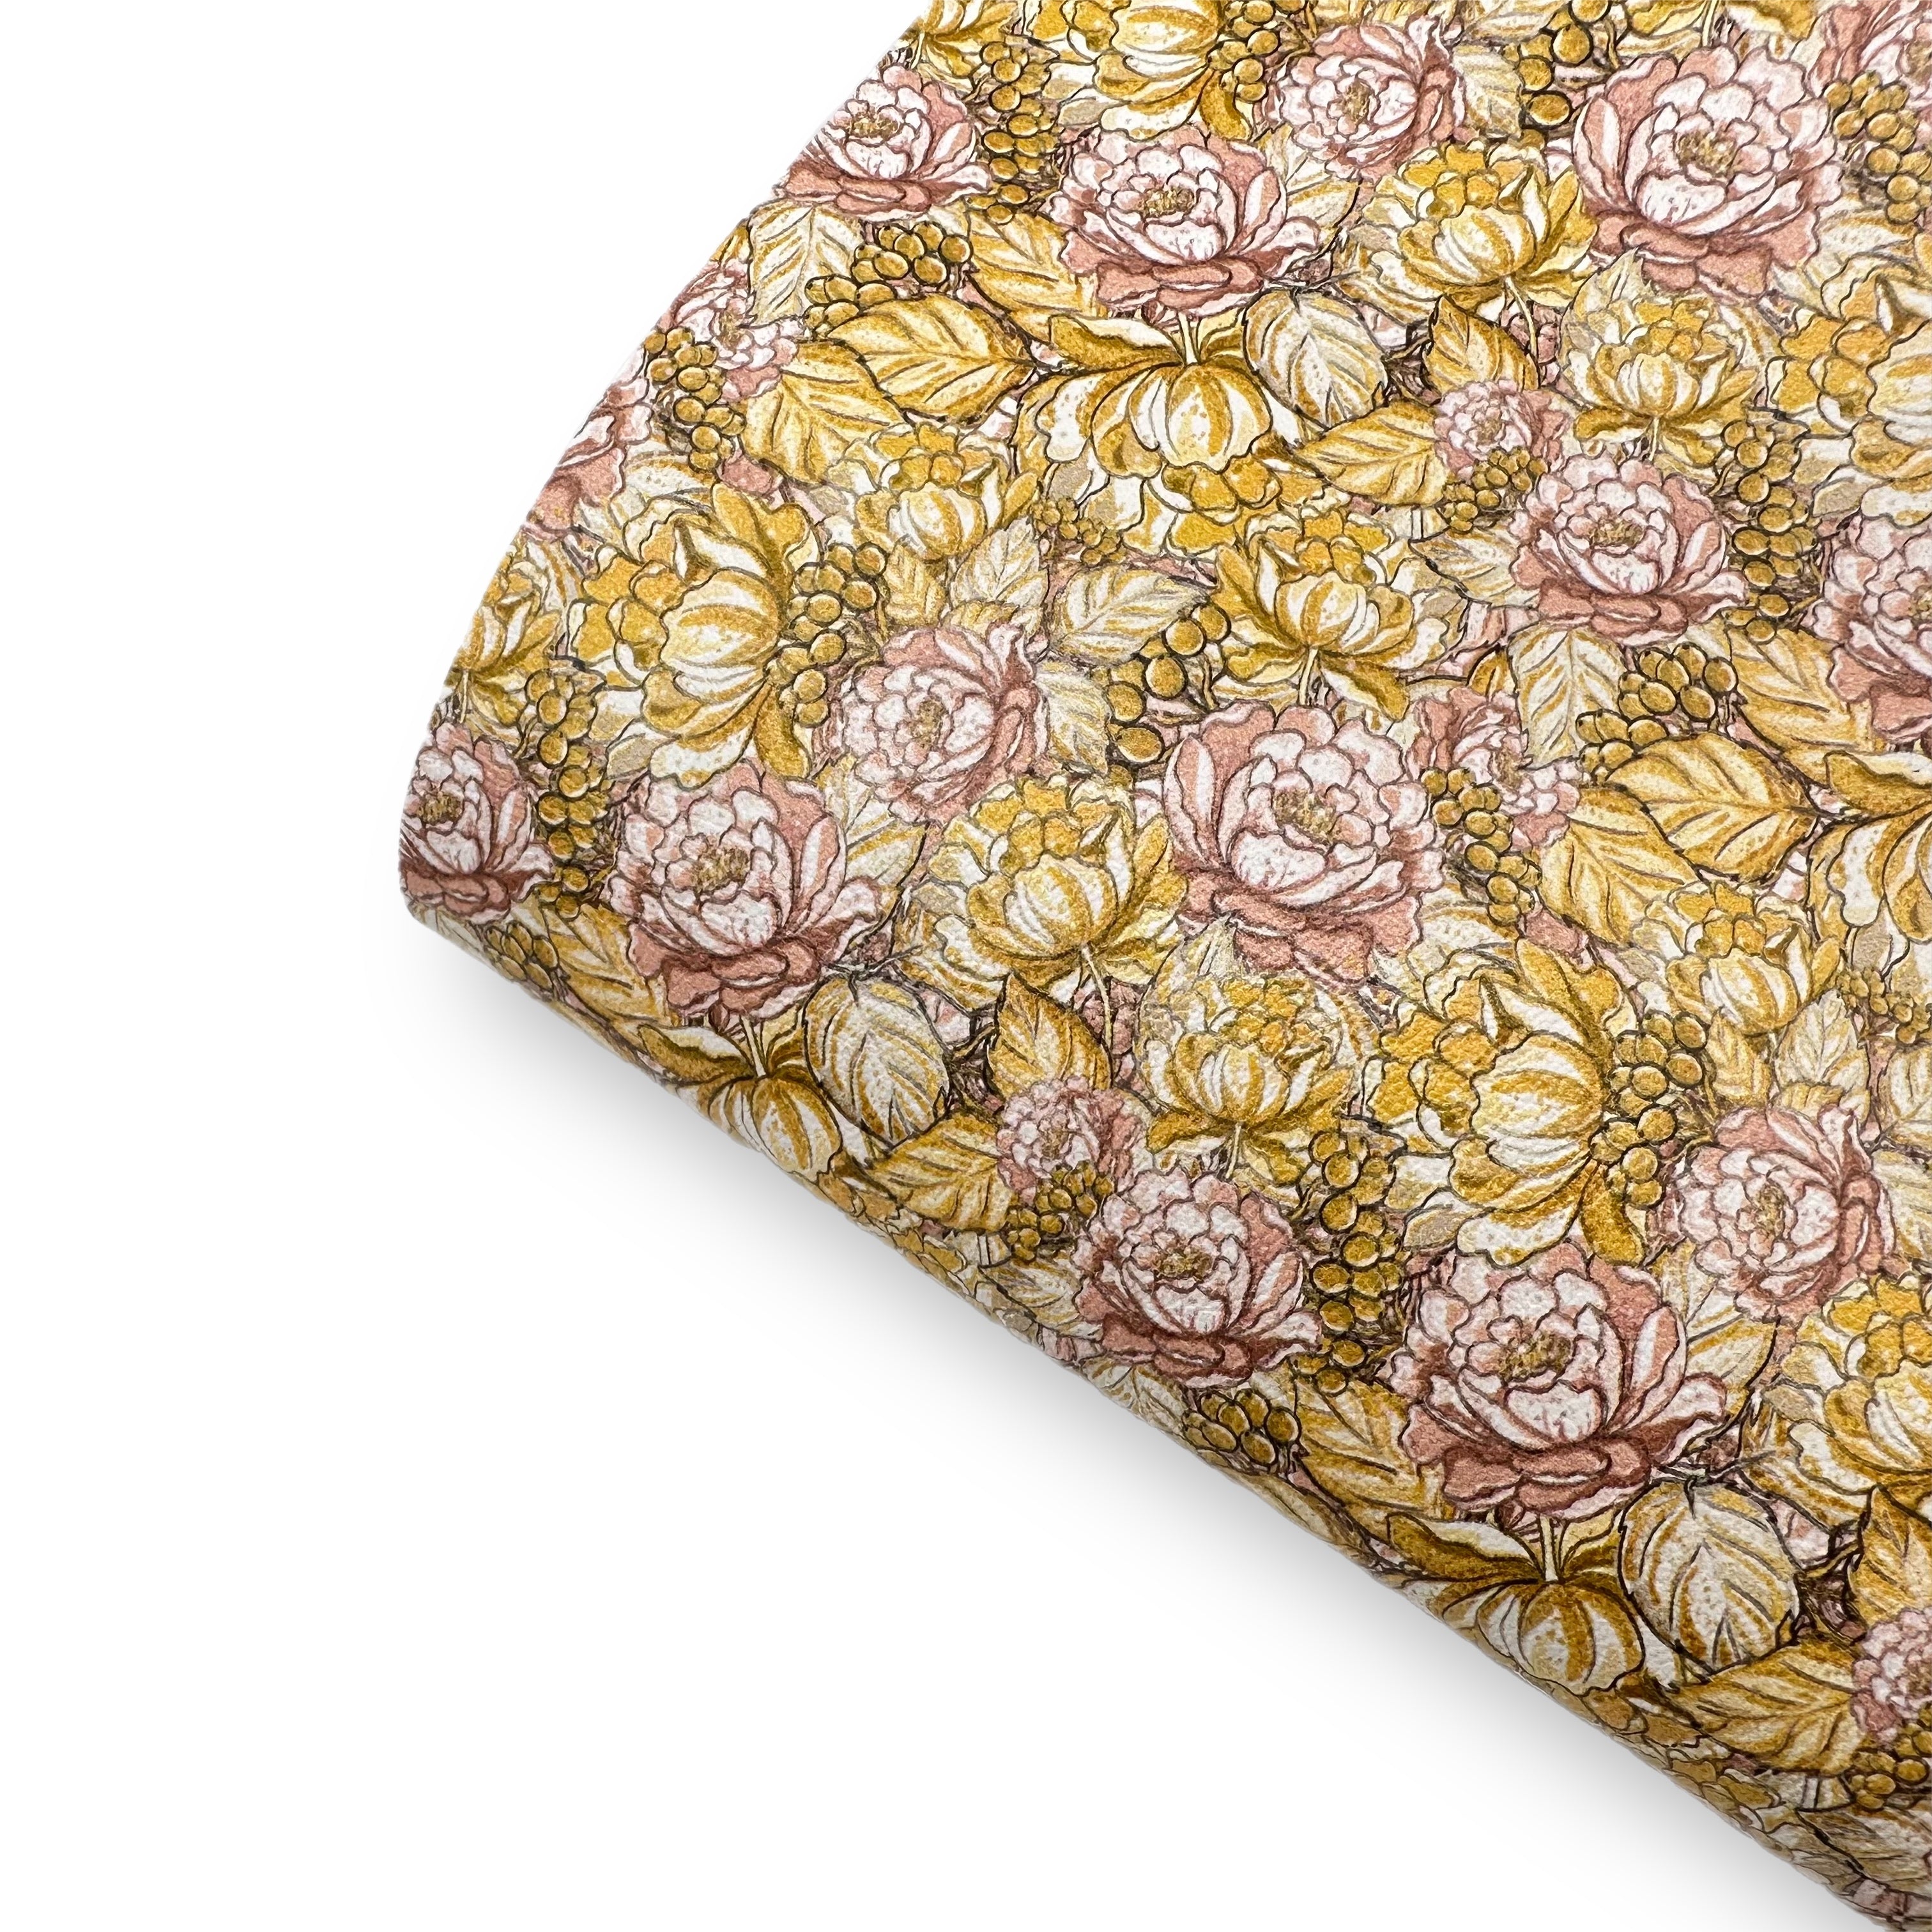 New year golden florals Premium Faux Leather Fabric Sheets